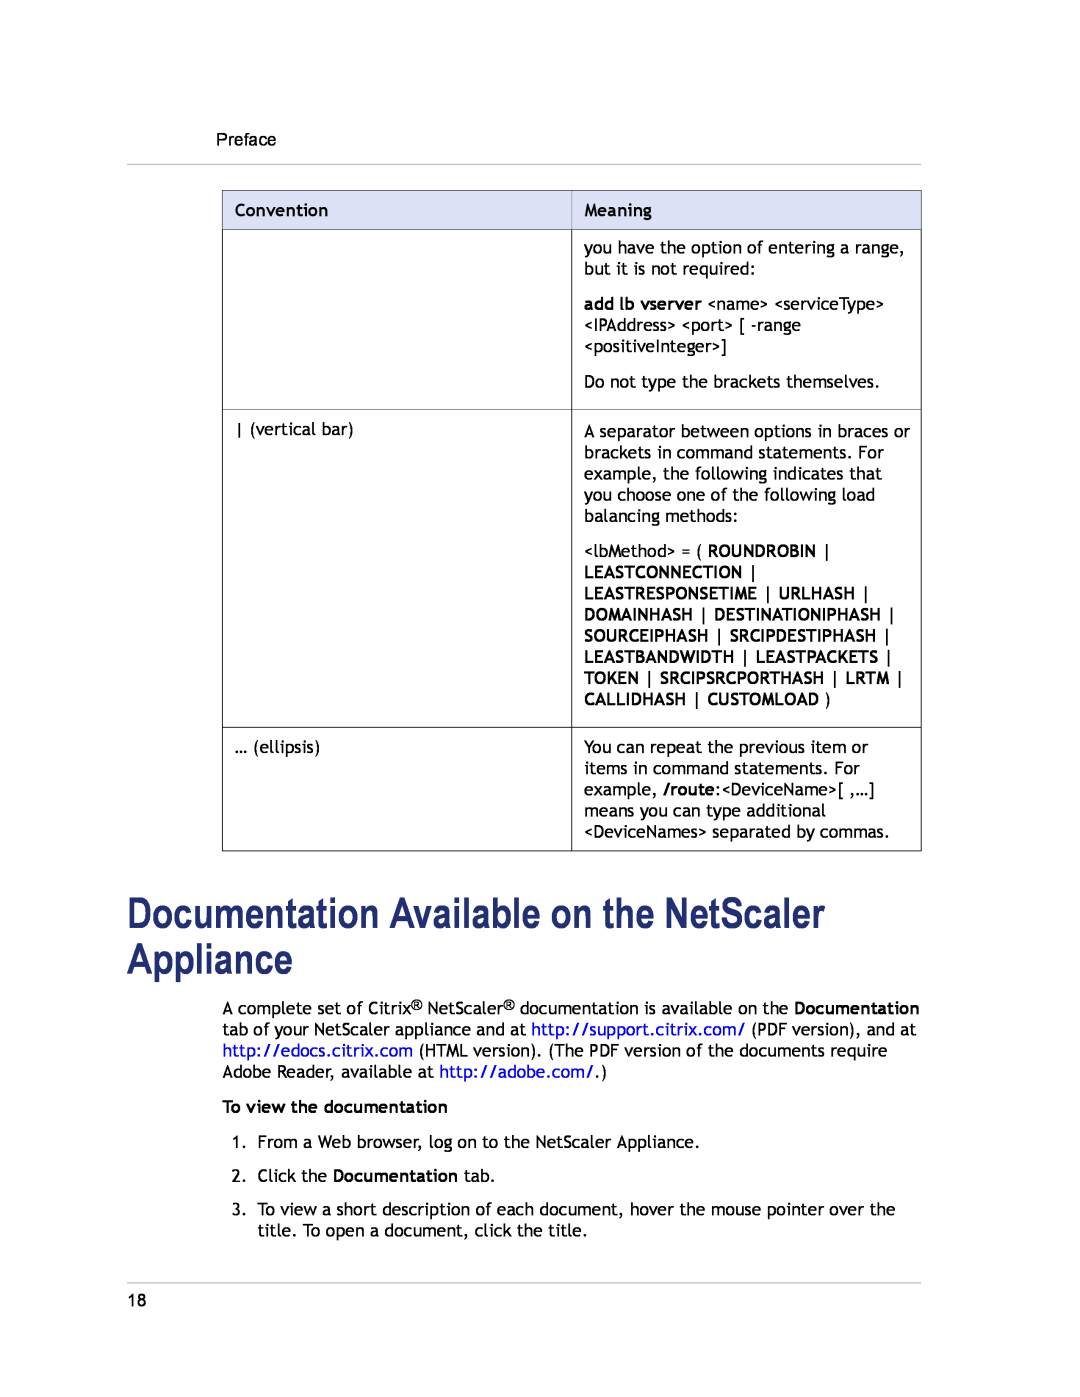 Citrix Systems CITRIX NETSCALER 9.3 Documentation Available on the NetScaler Appliance, Preface, To view the documentation 